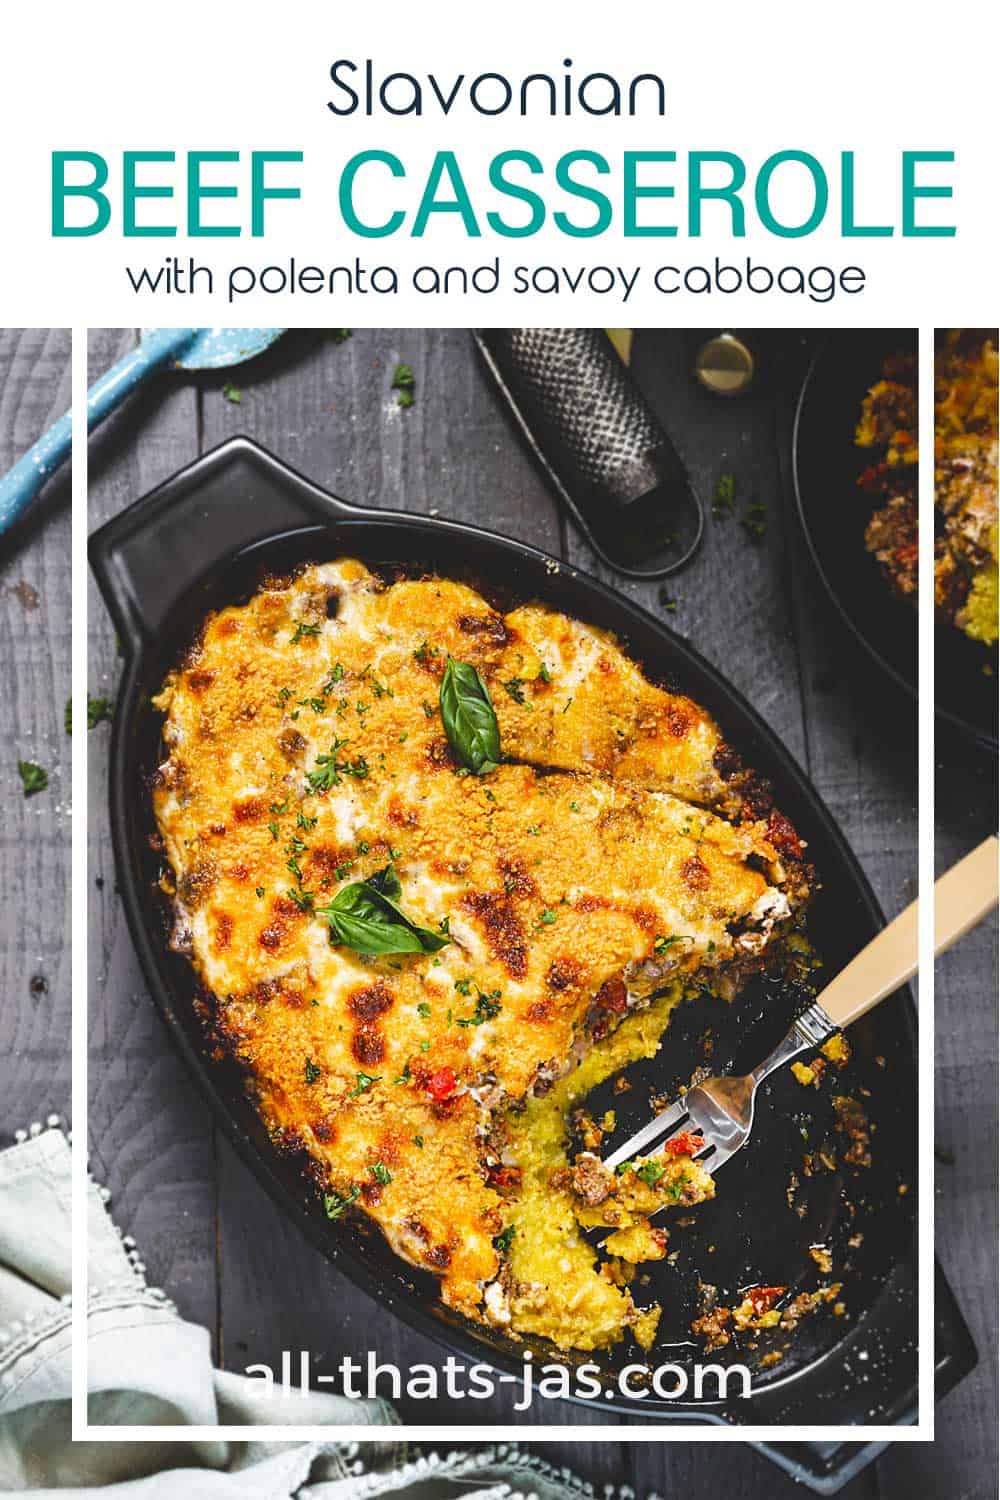 Casserole dish with a scoop of baked polenta with beef removed and text overlay.